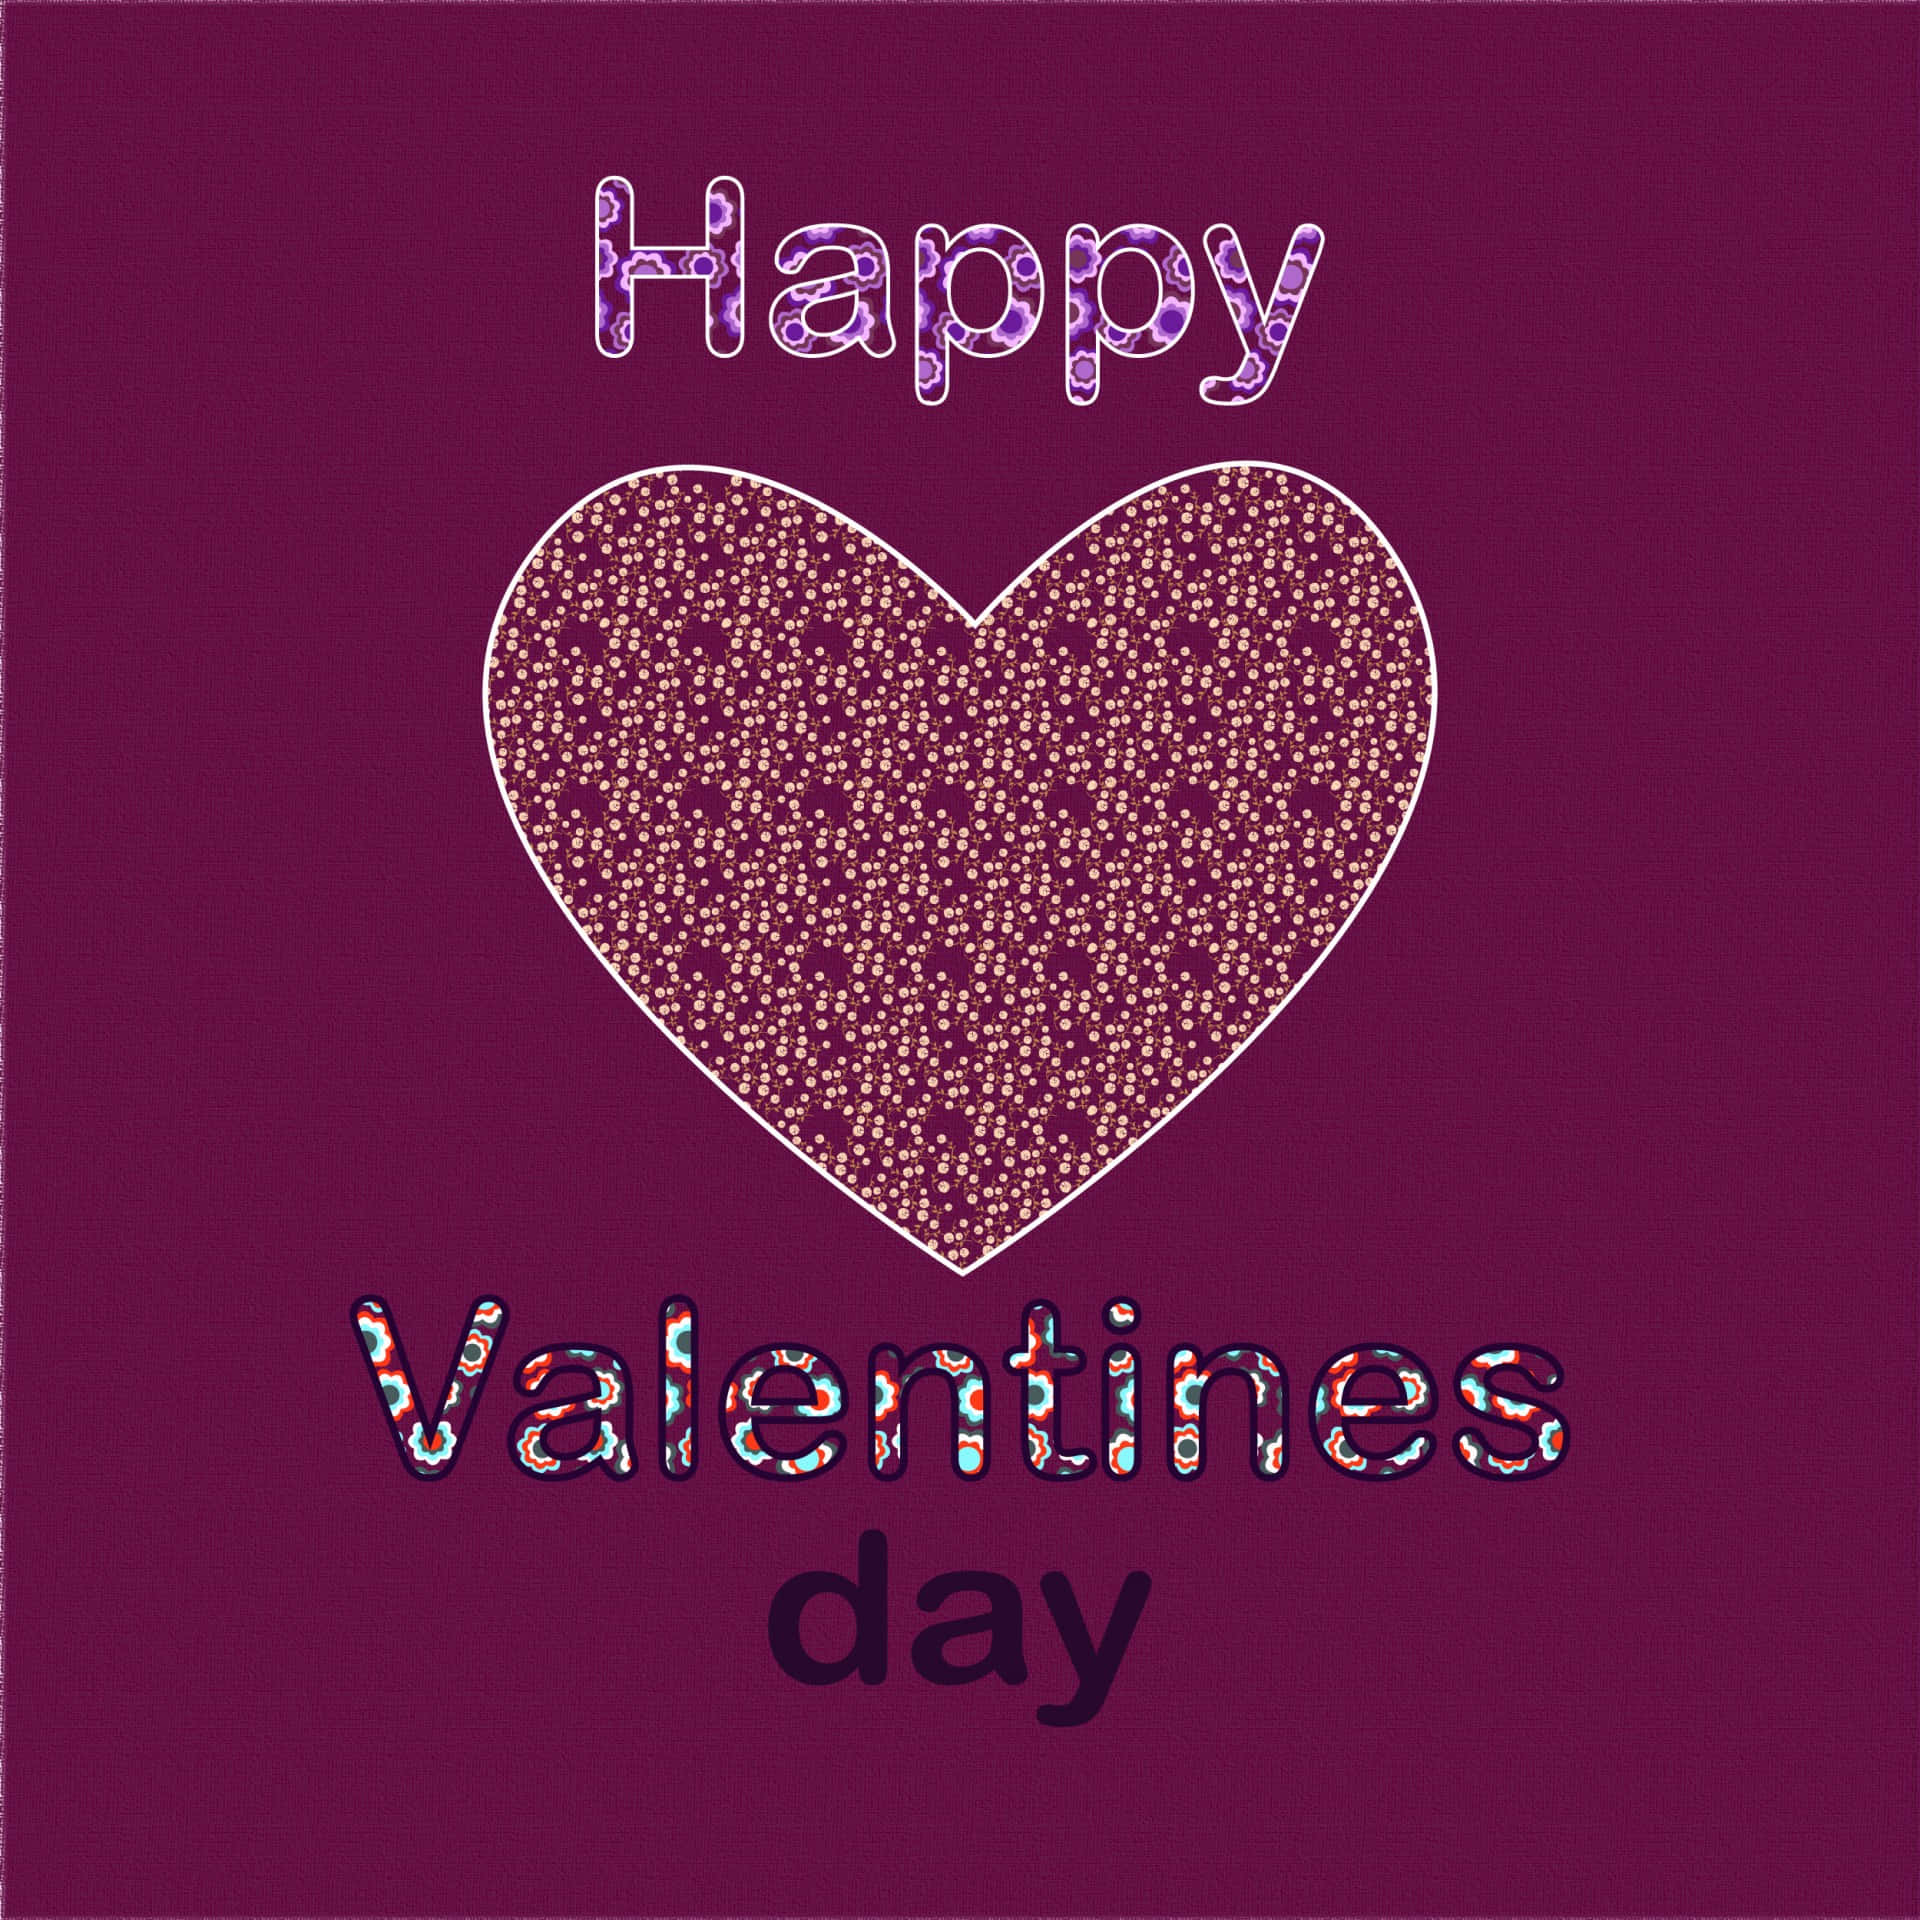 Valentine's Day Card With A Heart On A Purple Background